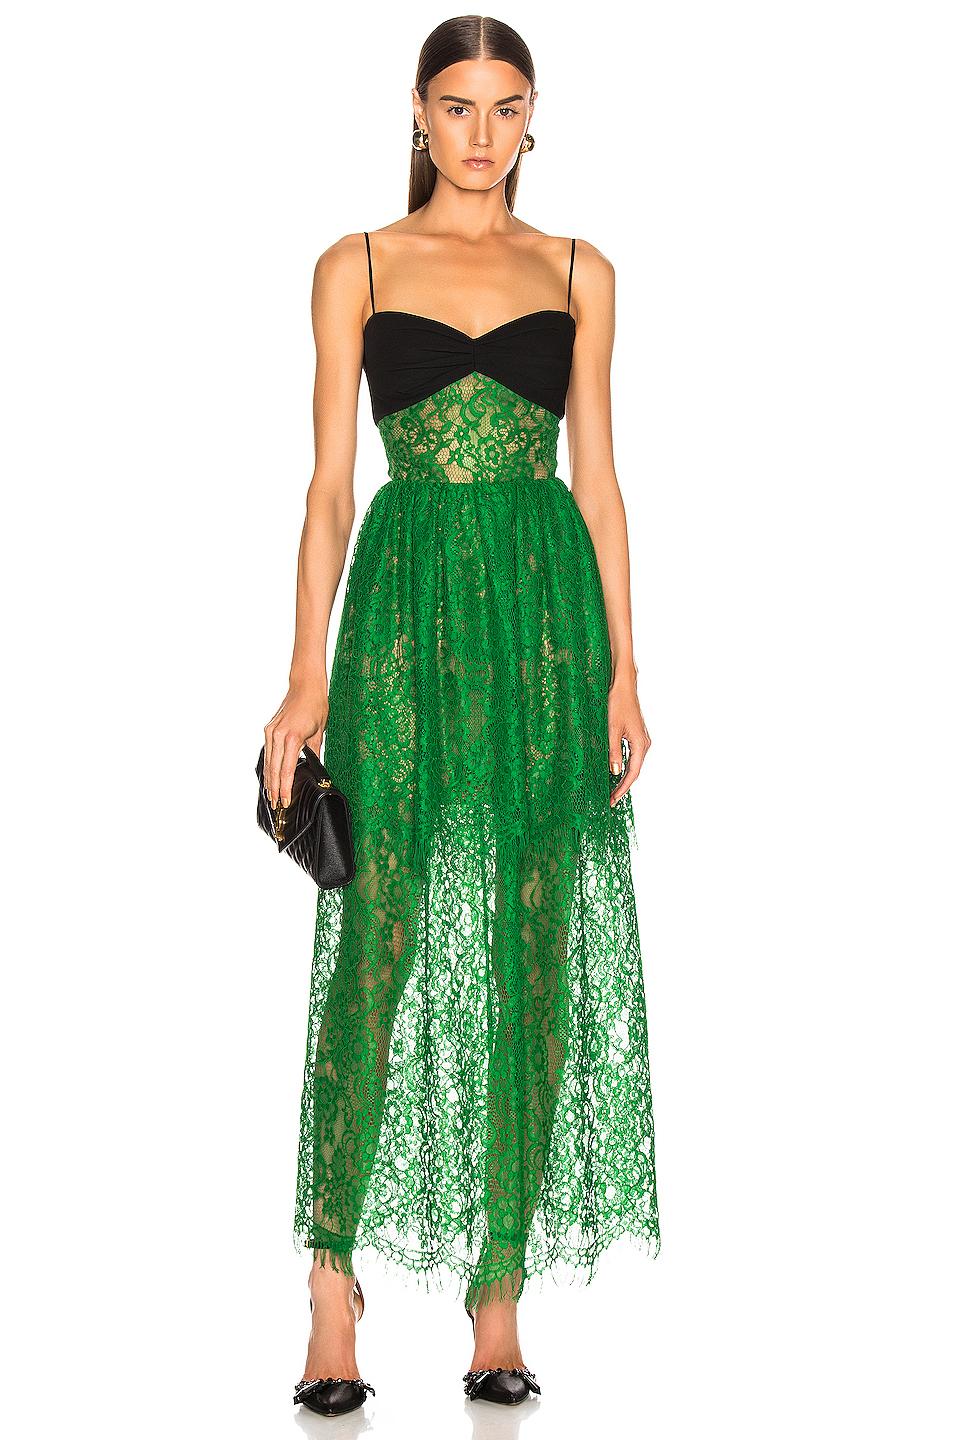 Rasario Bustier Lace Maxi Dress in Green & Black (Green) - Lyst